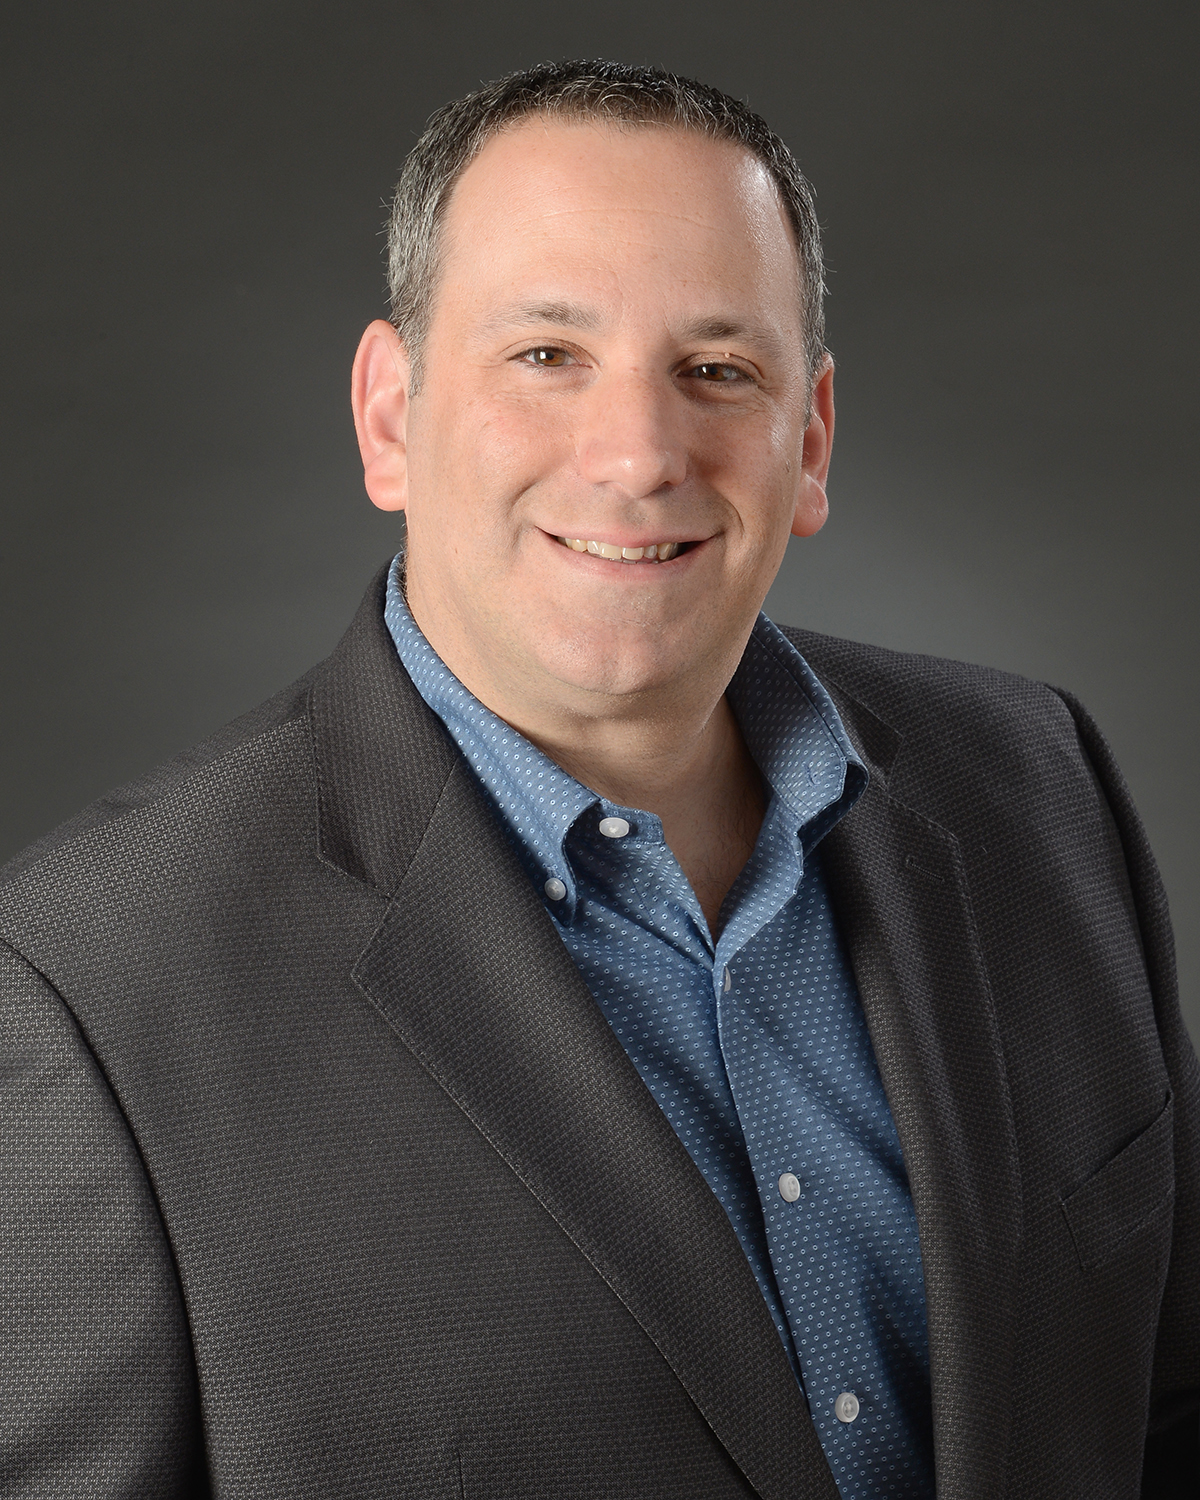 Protective Industrial Products, Inc. (“PIP®”) is pleased to announce the promotion of Sean Weil to the position of global Chief Financial Officer (CFO).